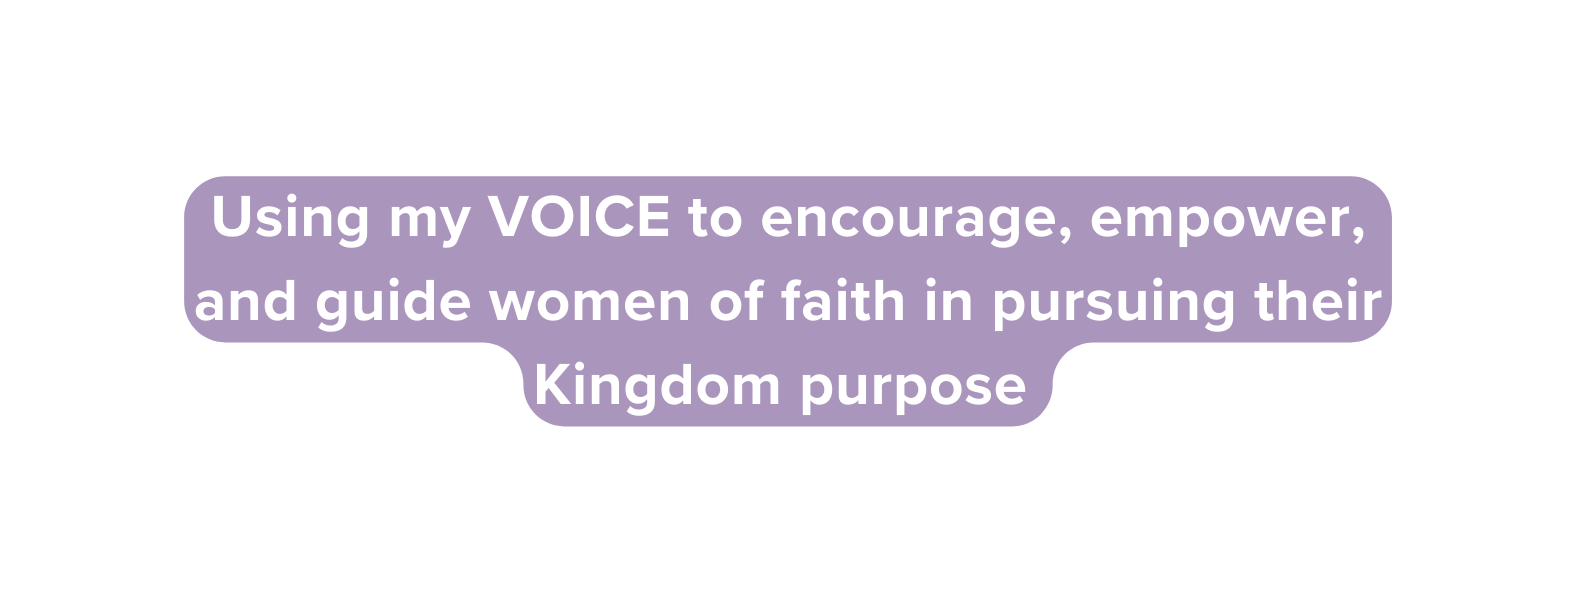 Using my VOICE to encourage empower and guide women of faith in pursuing their Kingdom purpose